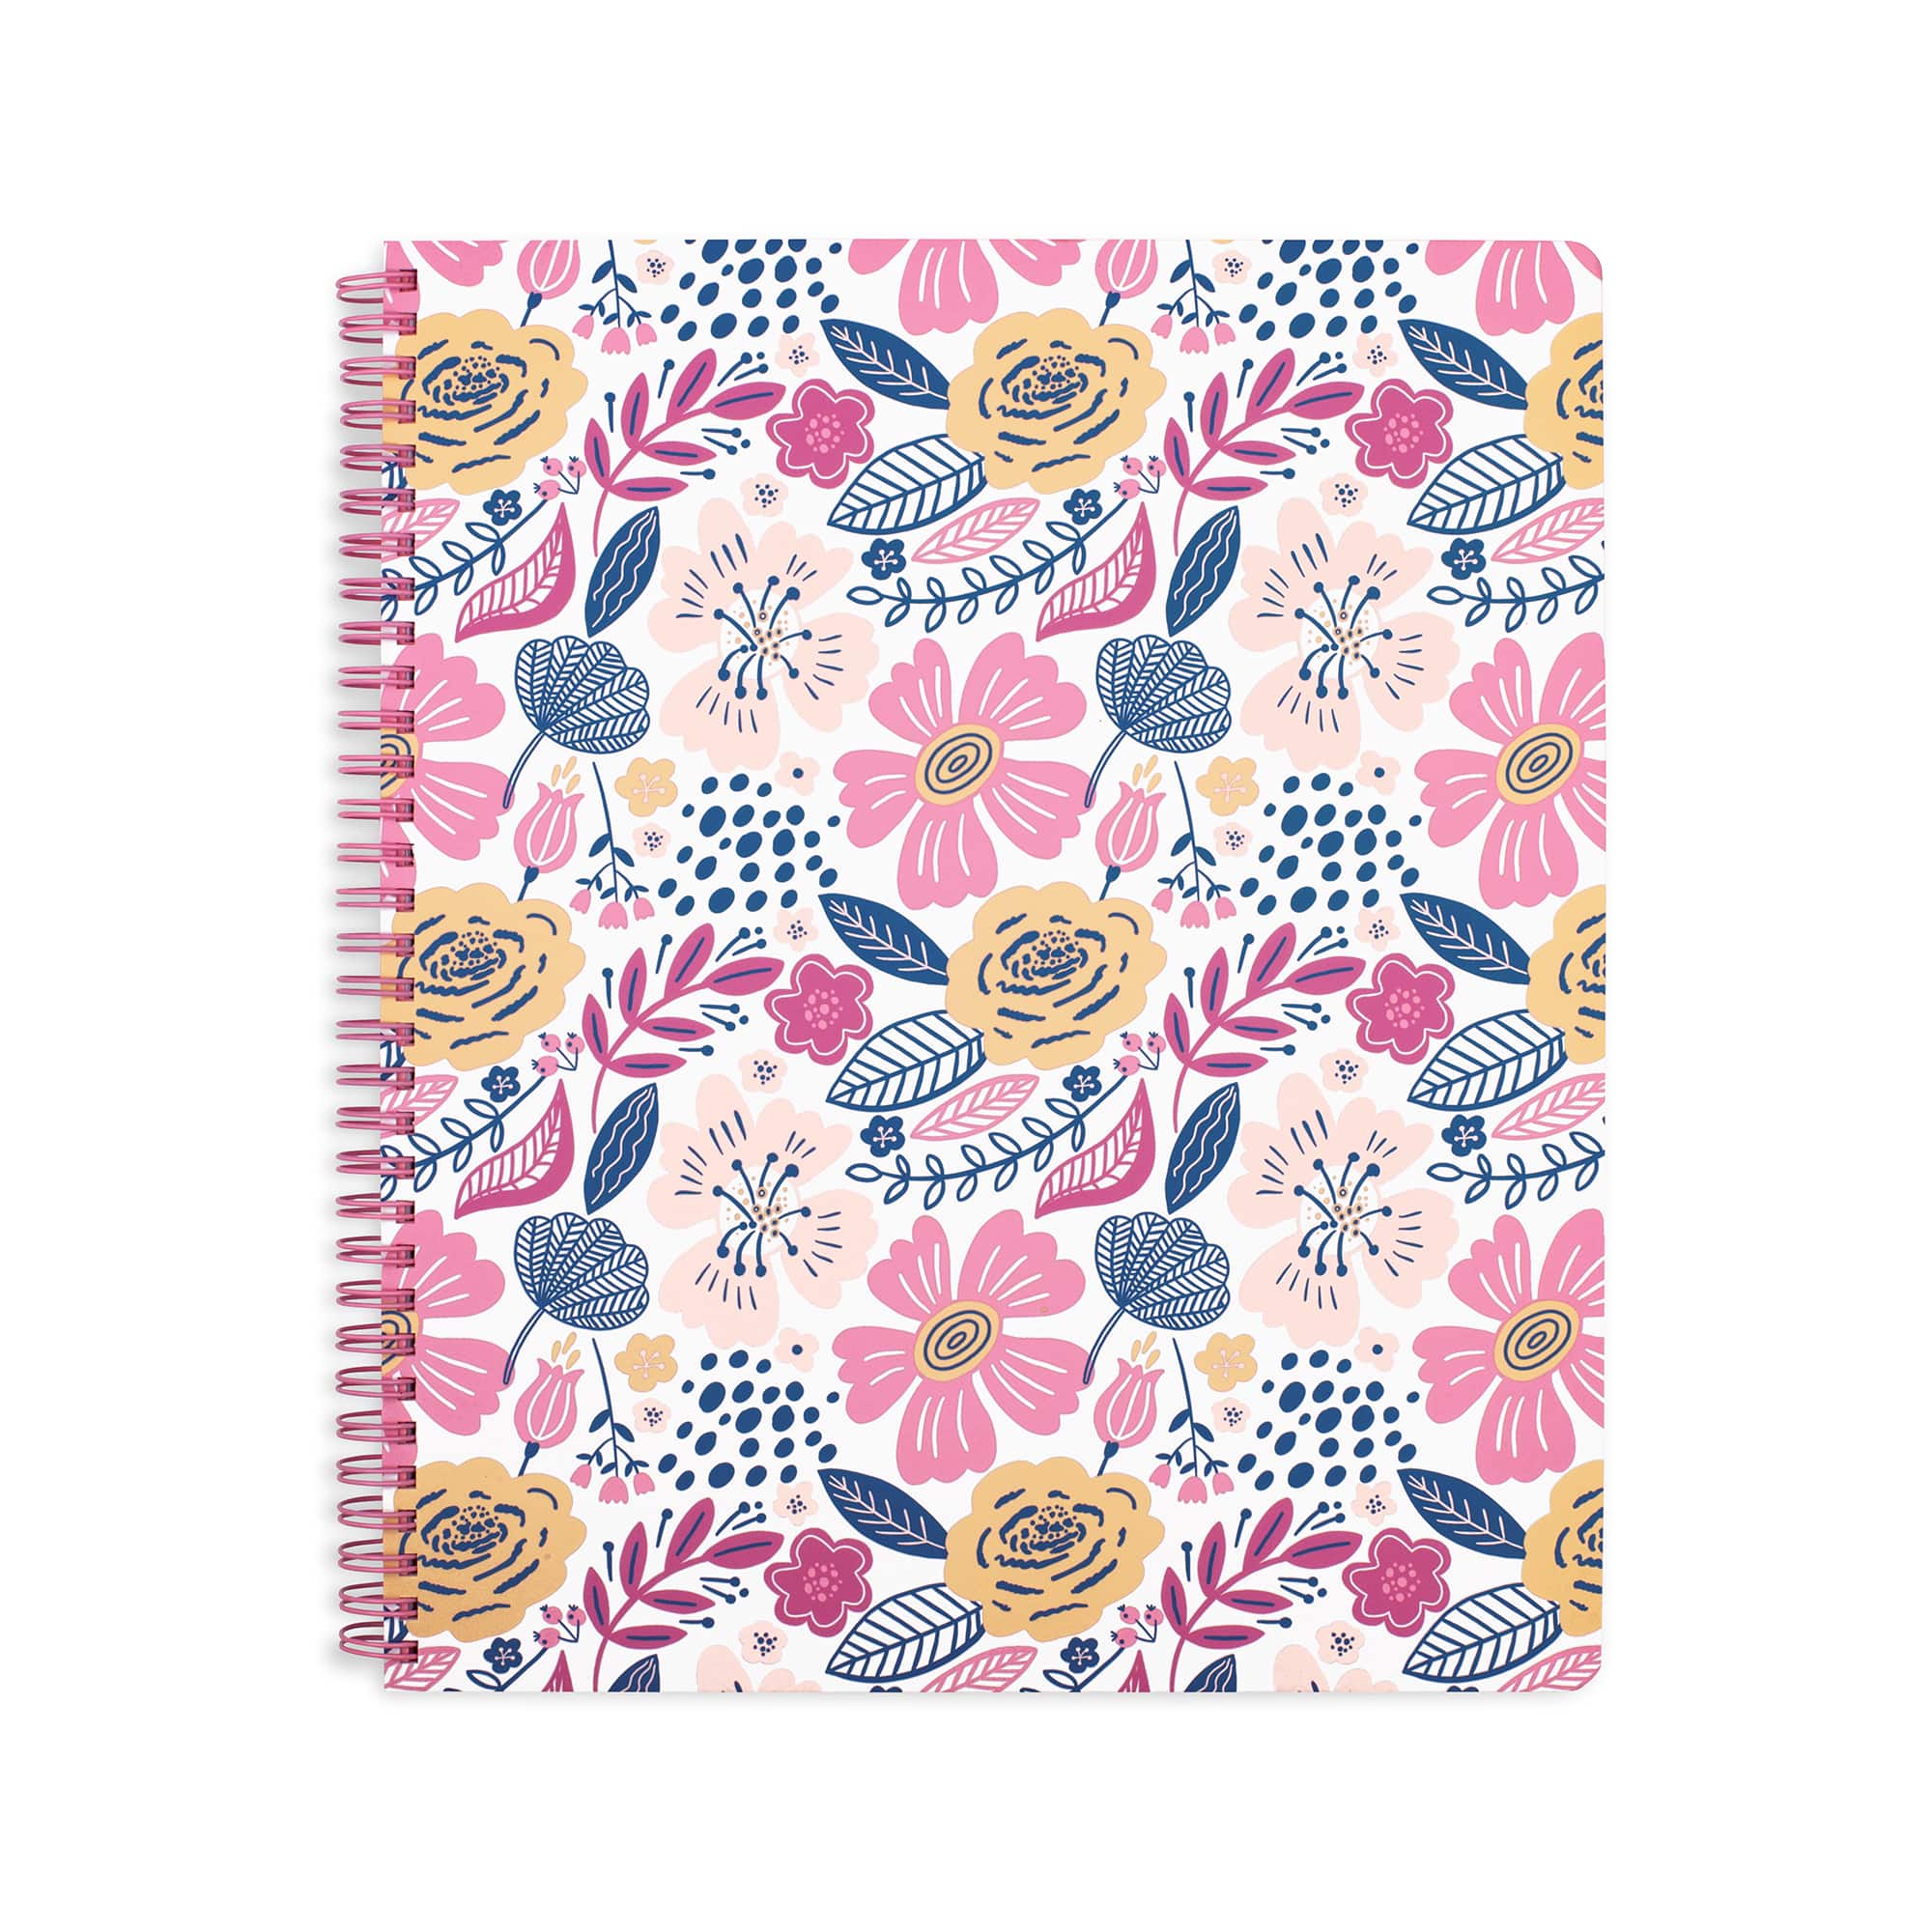 Monogram Initial Letter M Notebook for Women and Girls: Pink Floral  Notebook (Paperback)